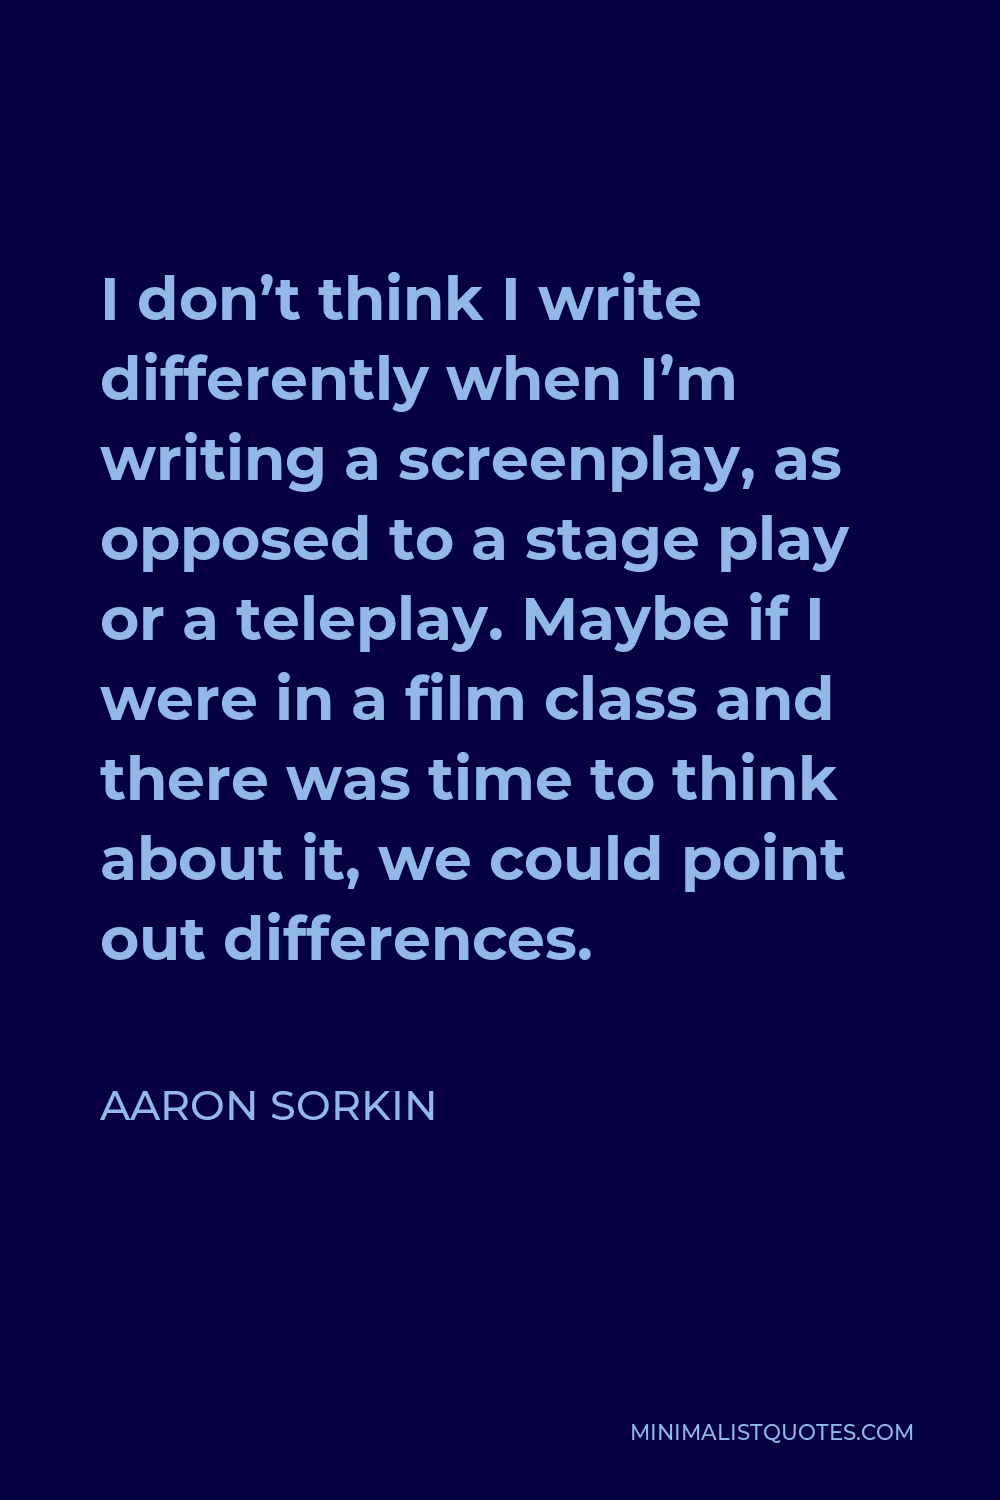 Aaron Sorkin Quote - I don’t think I write differently when I’m writing a screenplay, as opposed to a stage play or a teleplay. Maybe if I were in a film class and there was time to think about it, we could point out differences.